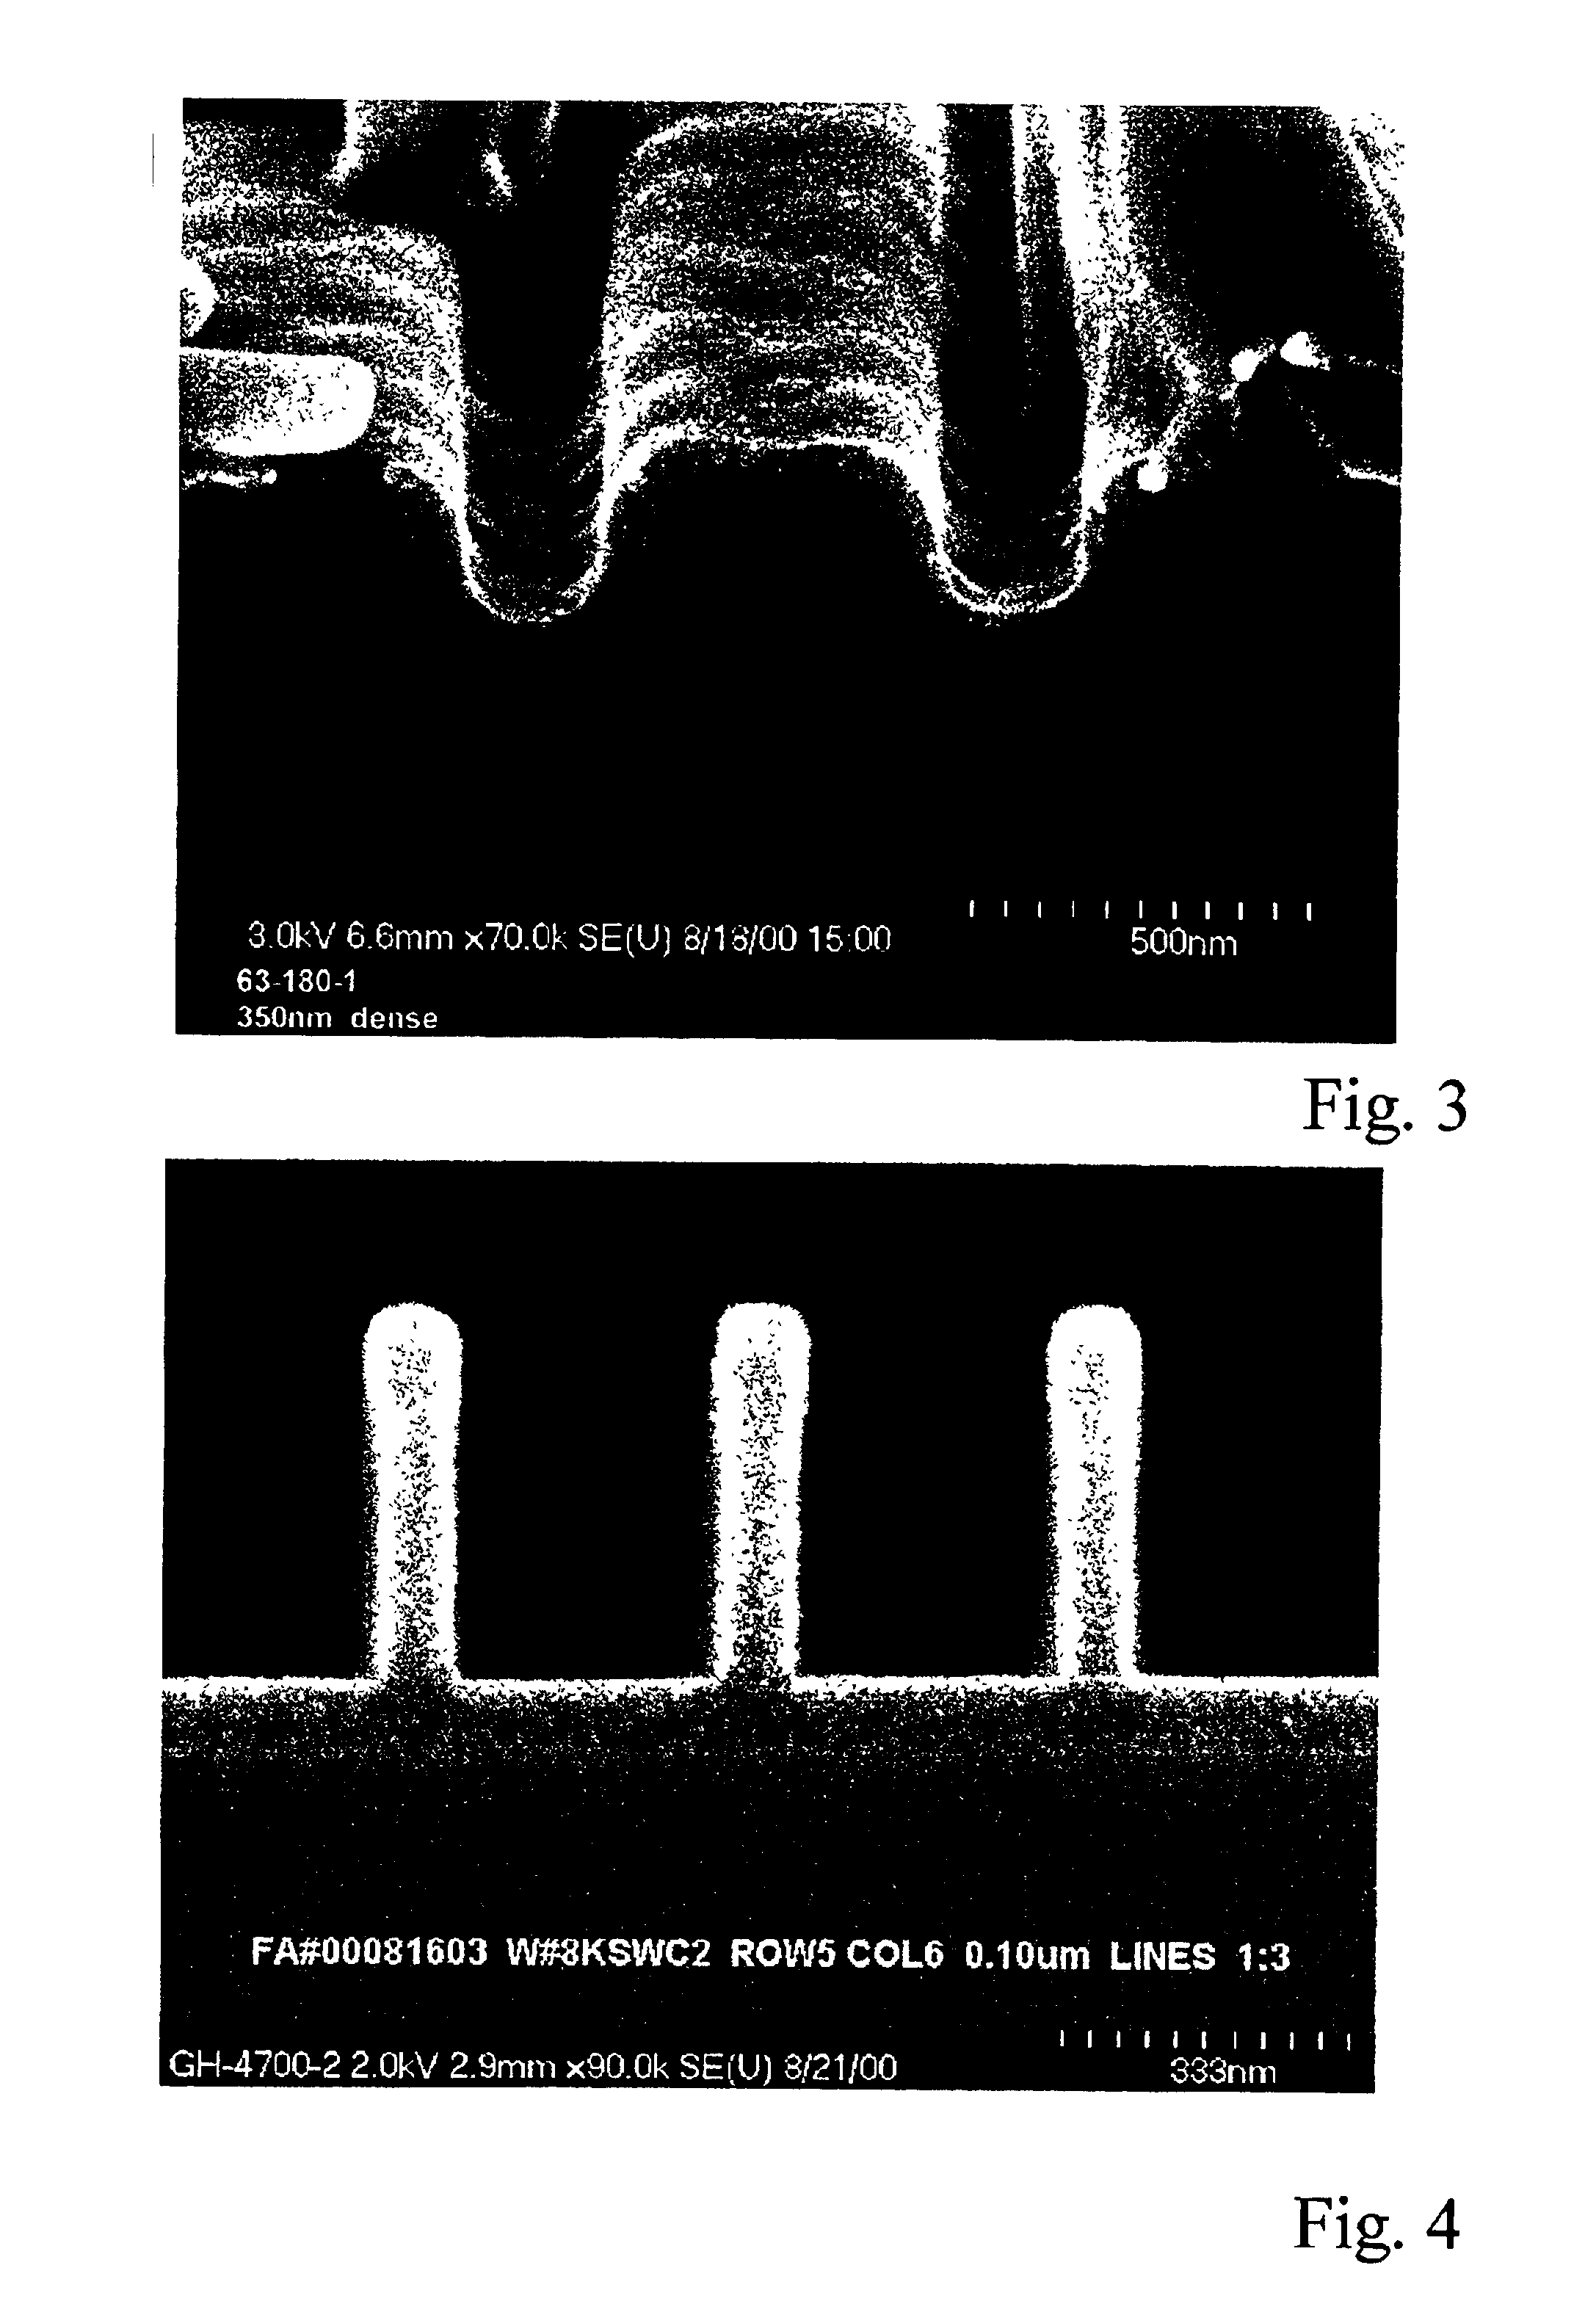 Organic polymeric antireflective coatings deposited by chemical vapor deposition